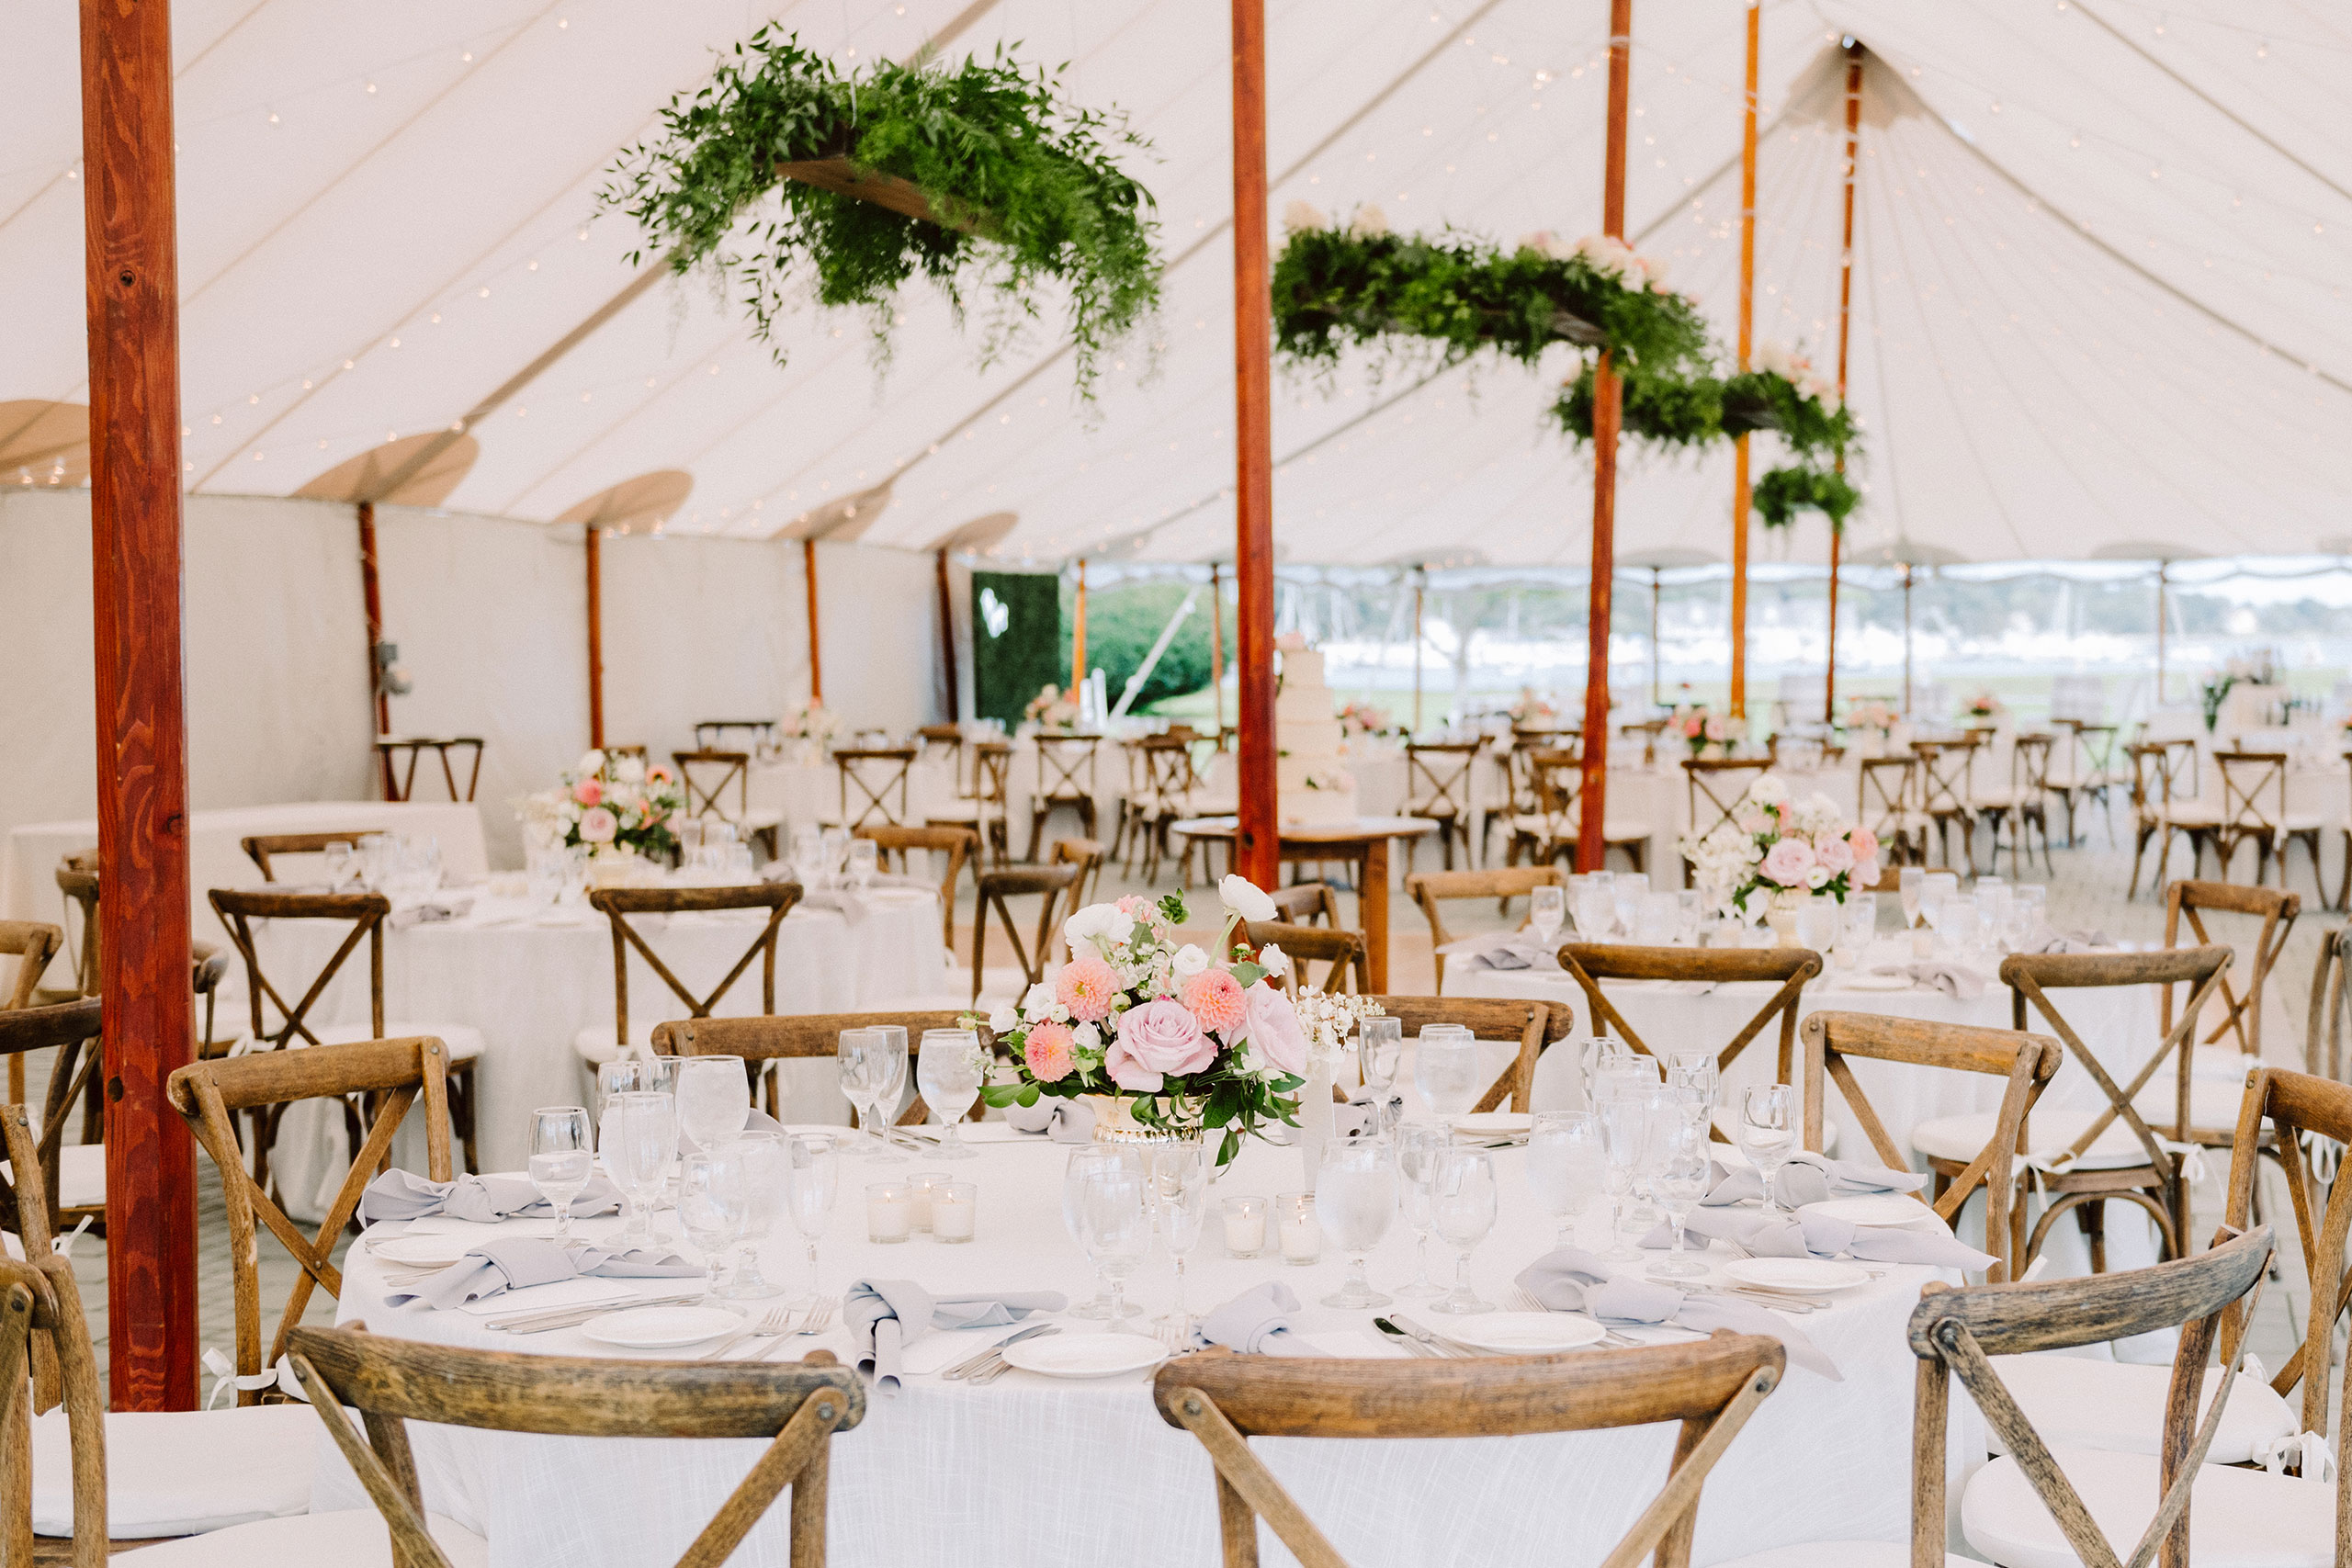 Wedding table settings beneath large outdoor tent